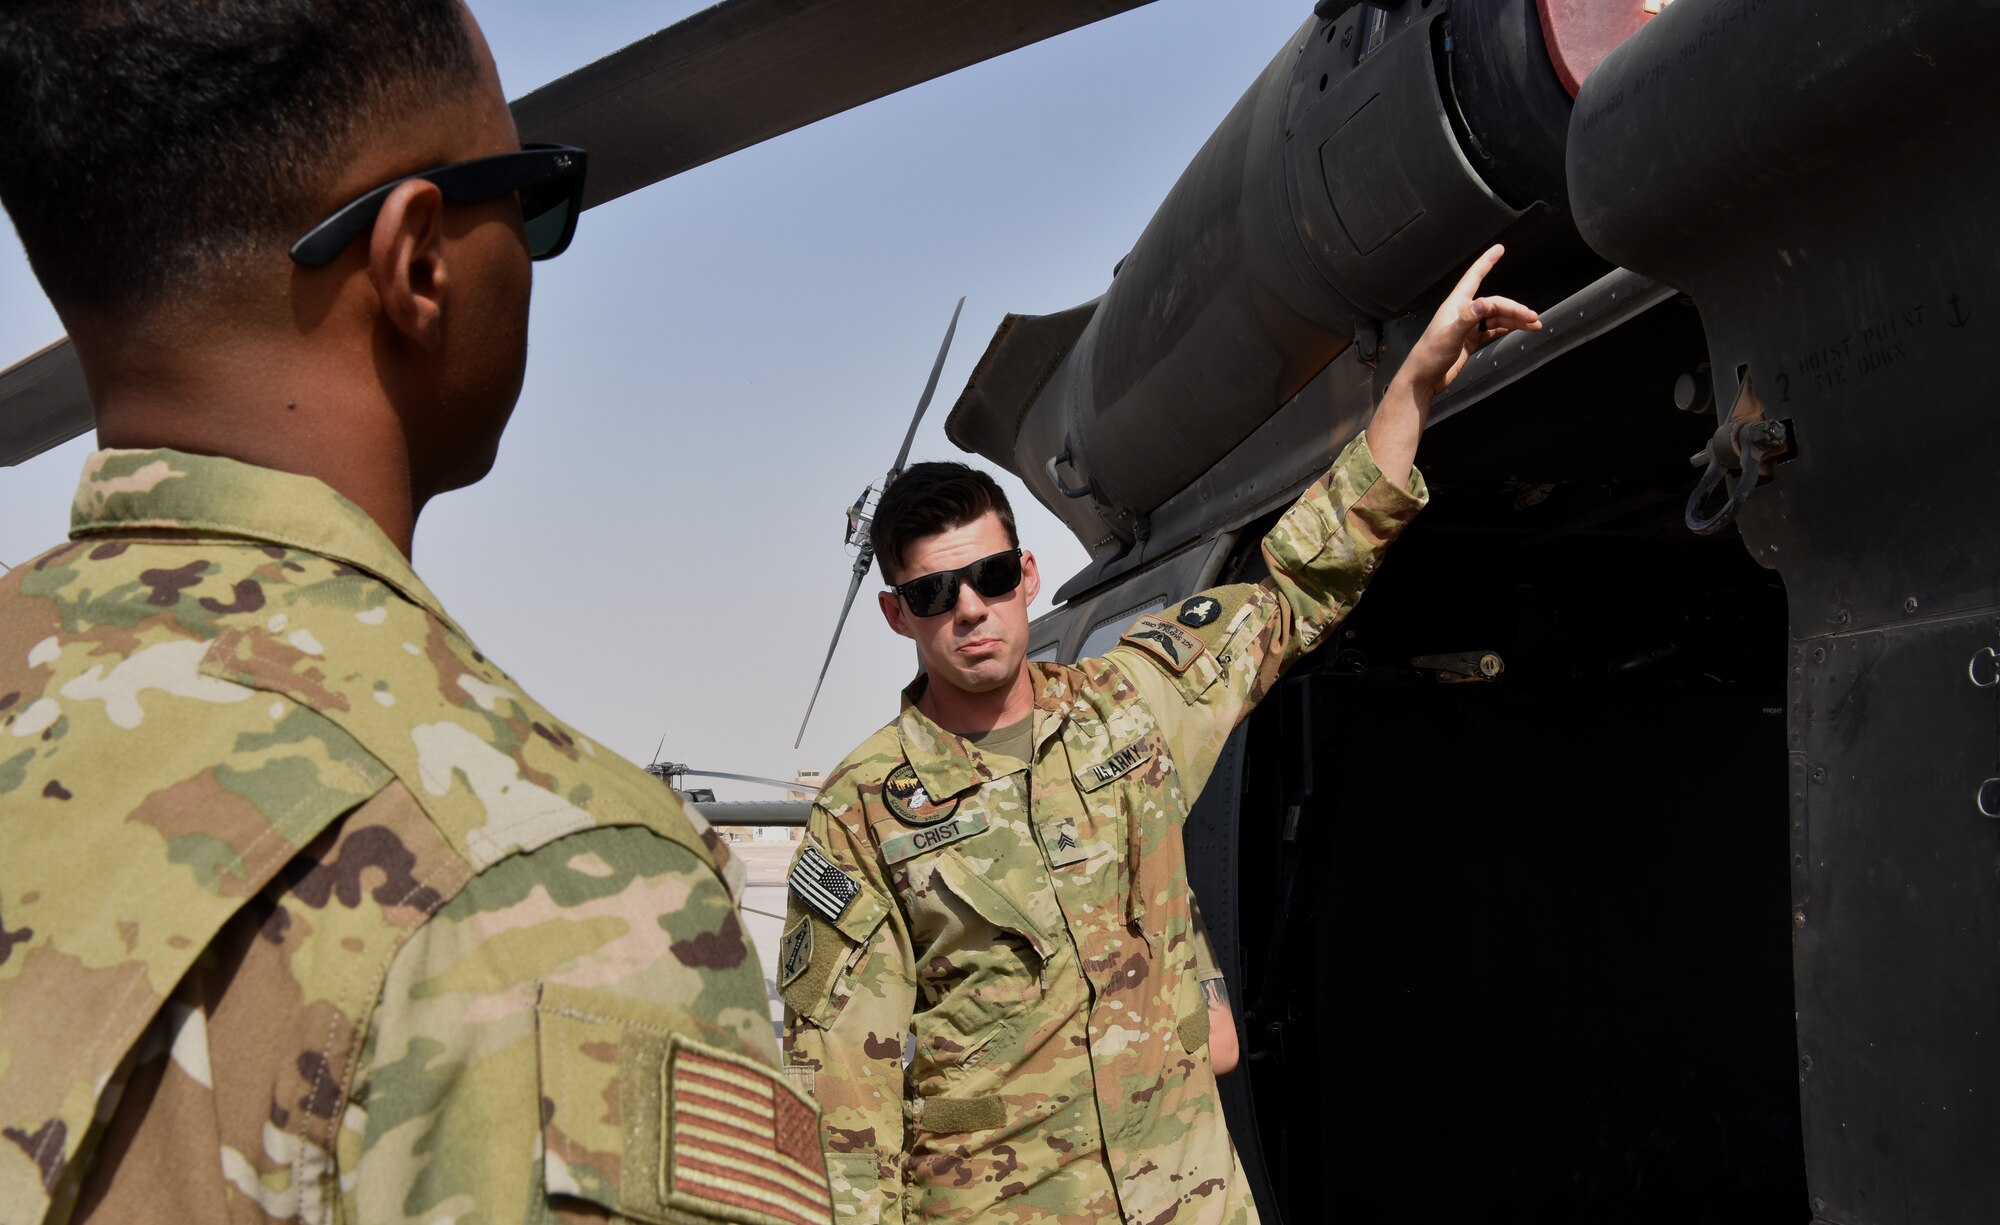 Members of the 378th Expeditionary Civil Engineering Squadron Fire Department receive familiarization training from members of Task Force Javelin at Prince Sultan Air Base, Kingdom of Saudi Arabia, June 25, 2020. The crucial training enables the 378th ECES to work seamlessly with members of TFJ to load critically injure or ill patients for Med-Evac, quickening the loading of patients while maintaining a safe environment for responders.